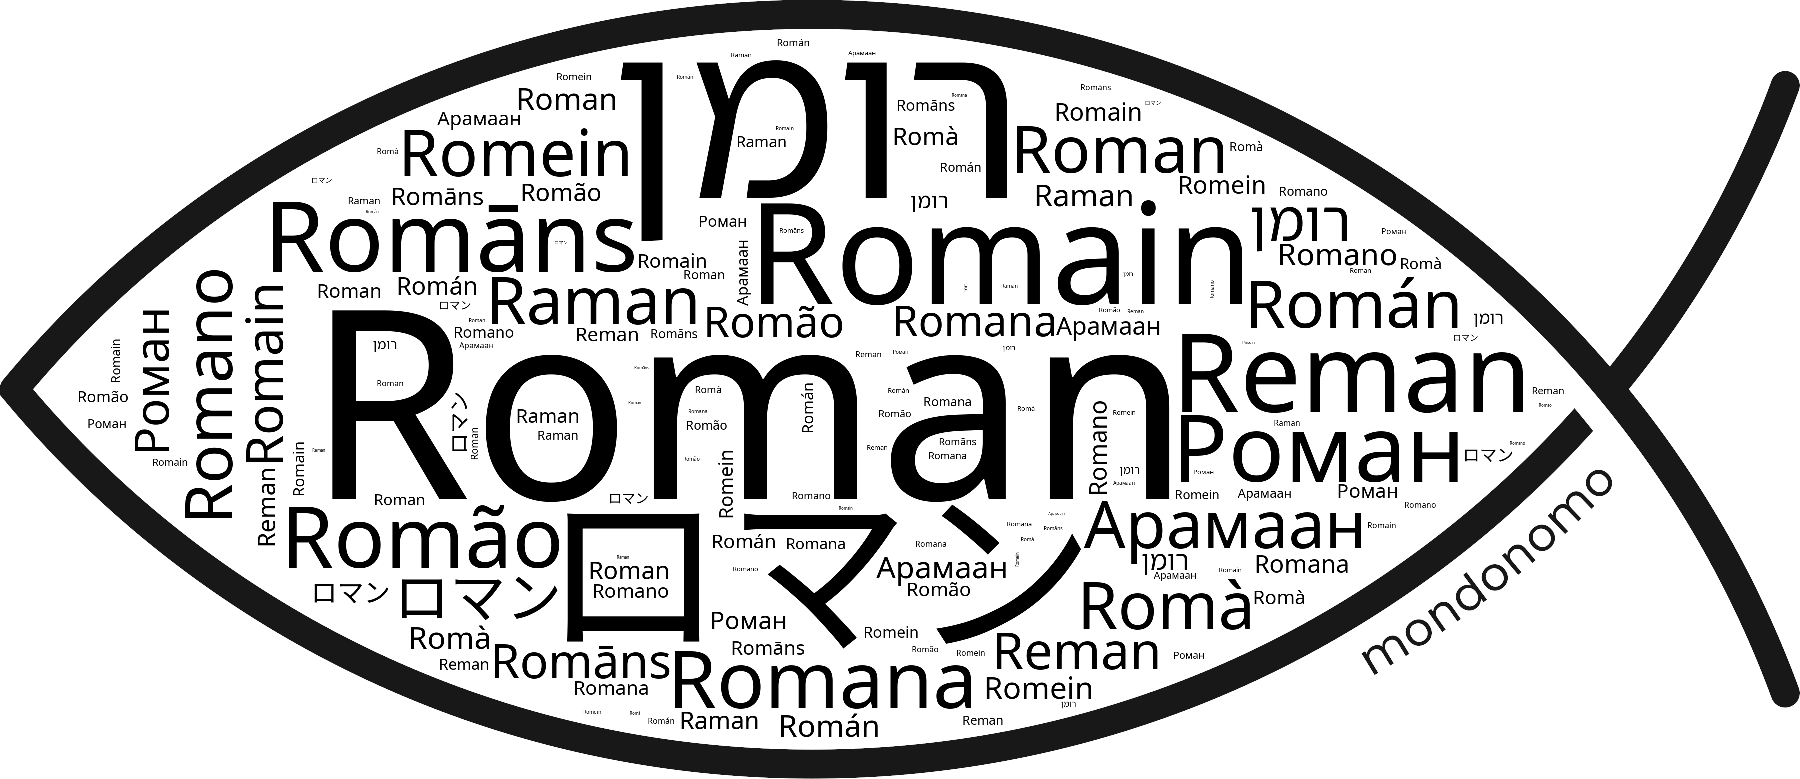 Name Roman in the world's Bibles